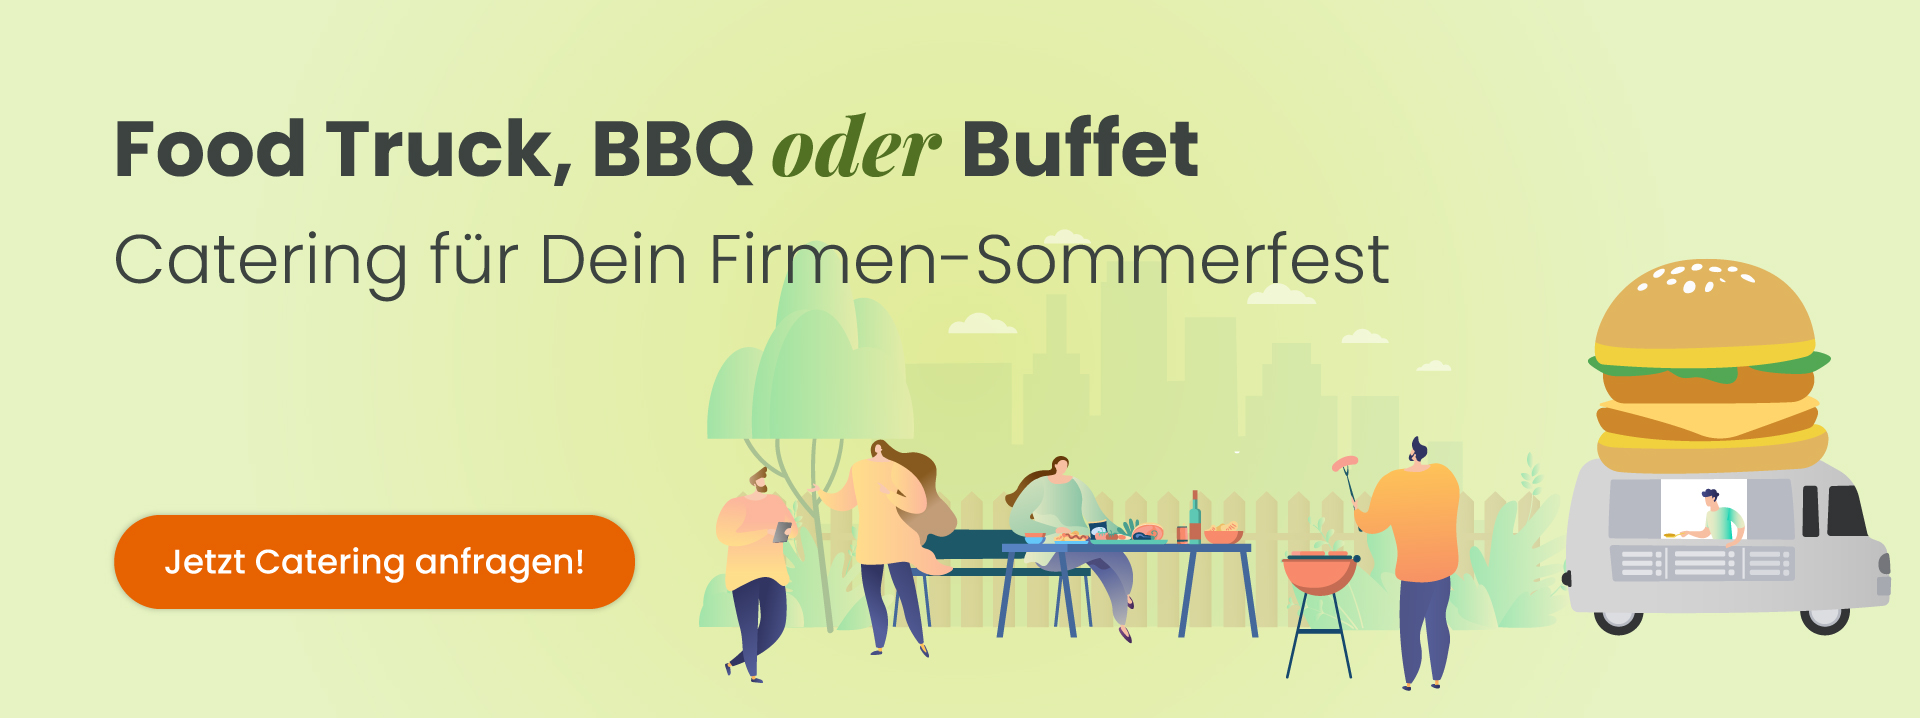 Catering Sommerfest Foodtruck, Barbecue oder Buffet (illustration)